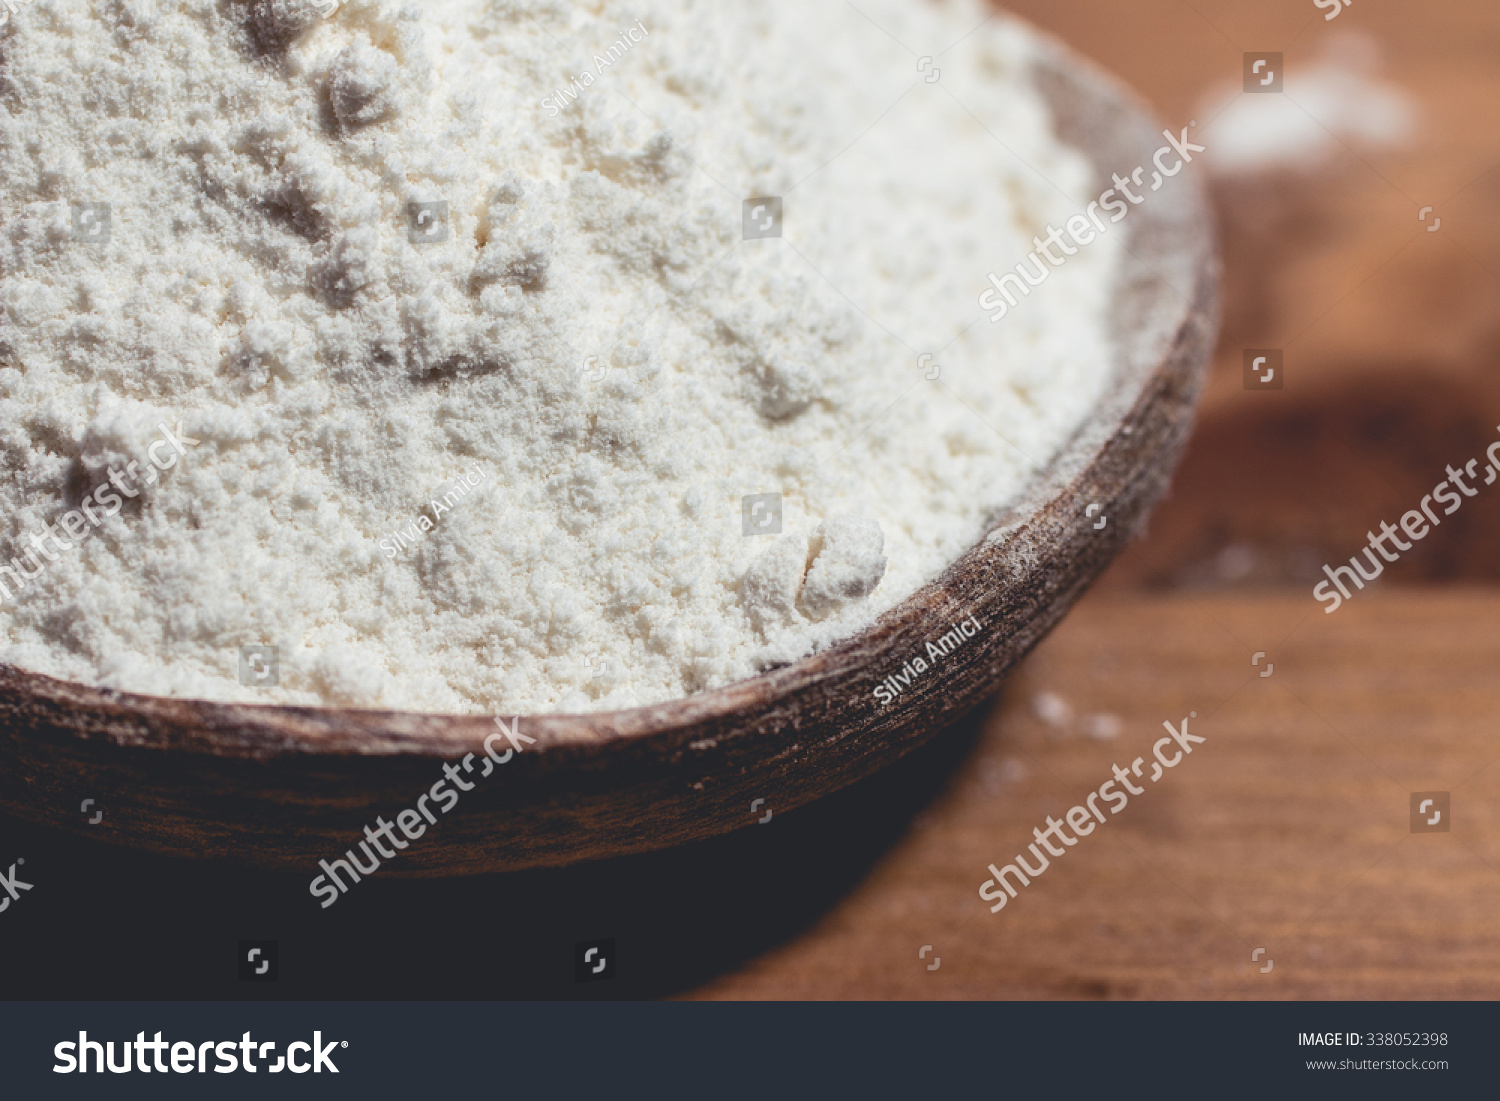 Wheat flour placed in a wooden spoon on the table #338052398